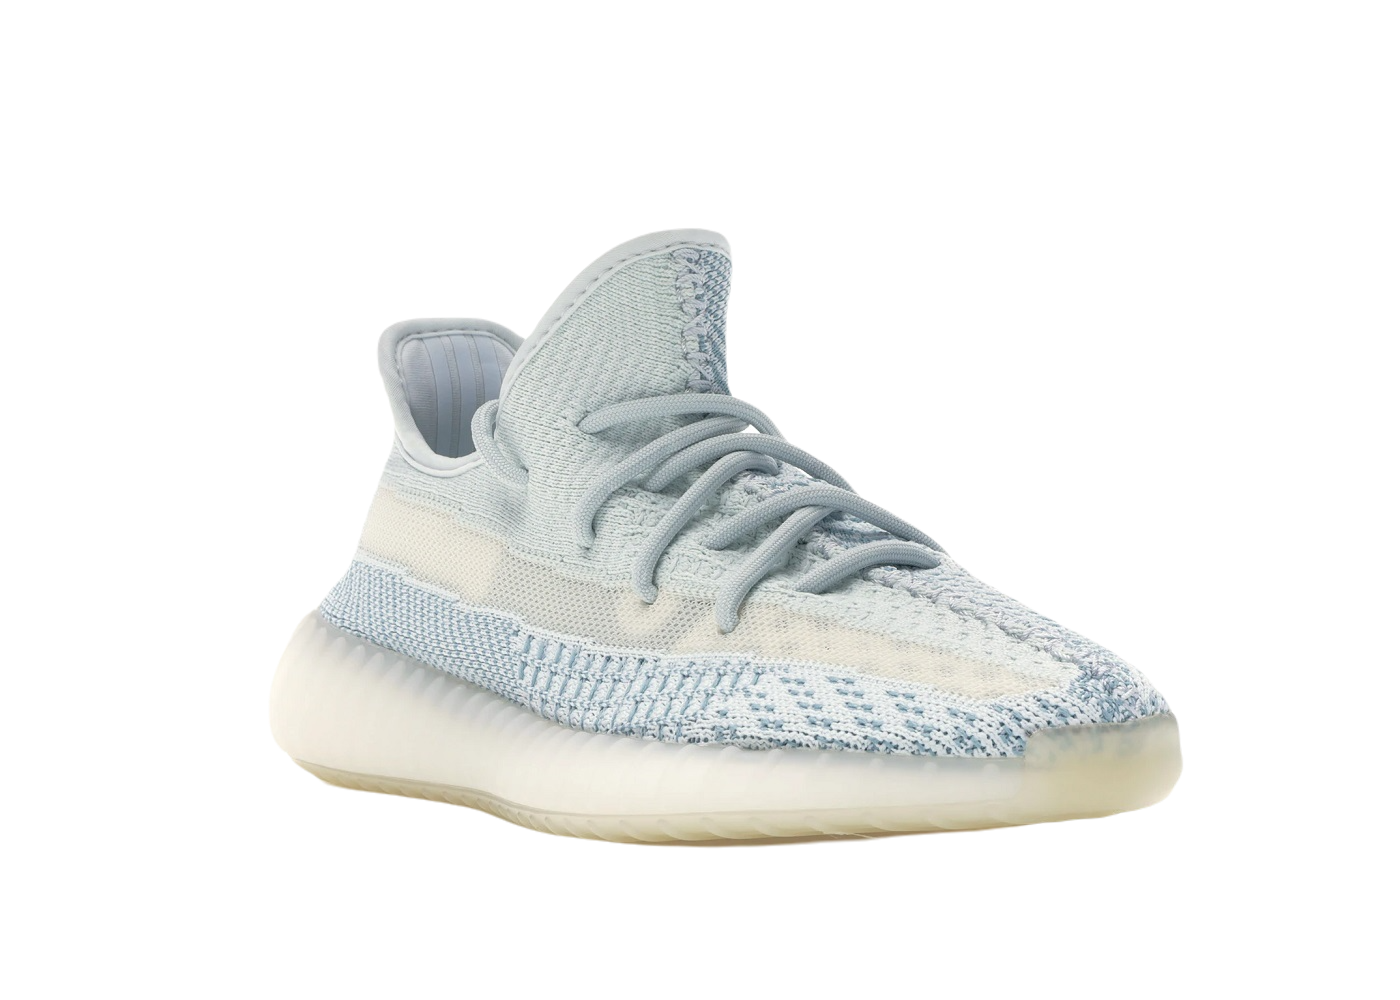 Adidas Yeezy Boost 350 V2 Cloud White ‘Non-Reflective’ - FW3043